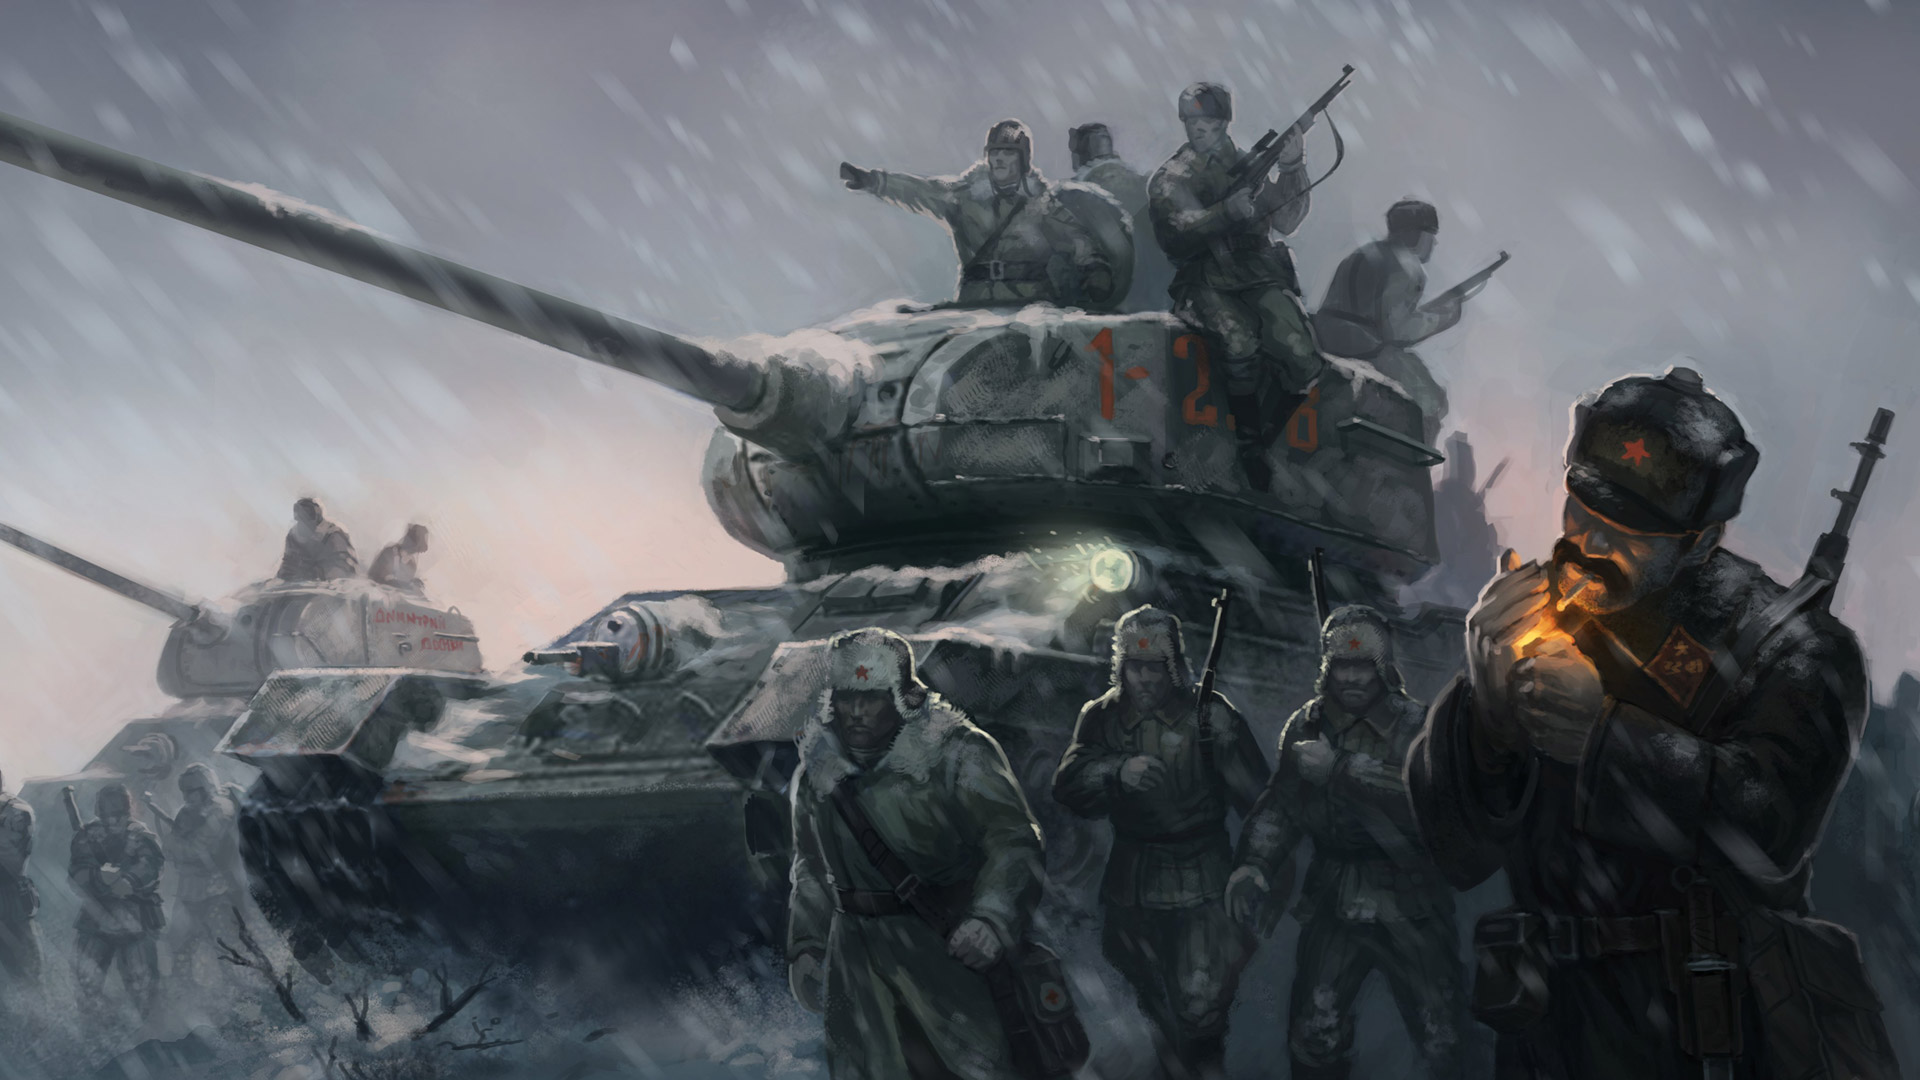 Wallpapers from Company of Heroes 2 | gamepressure.com